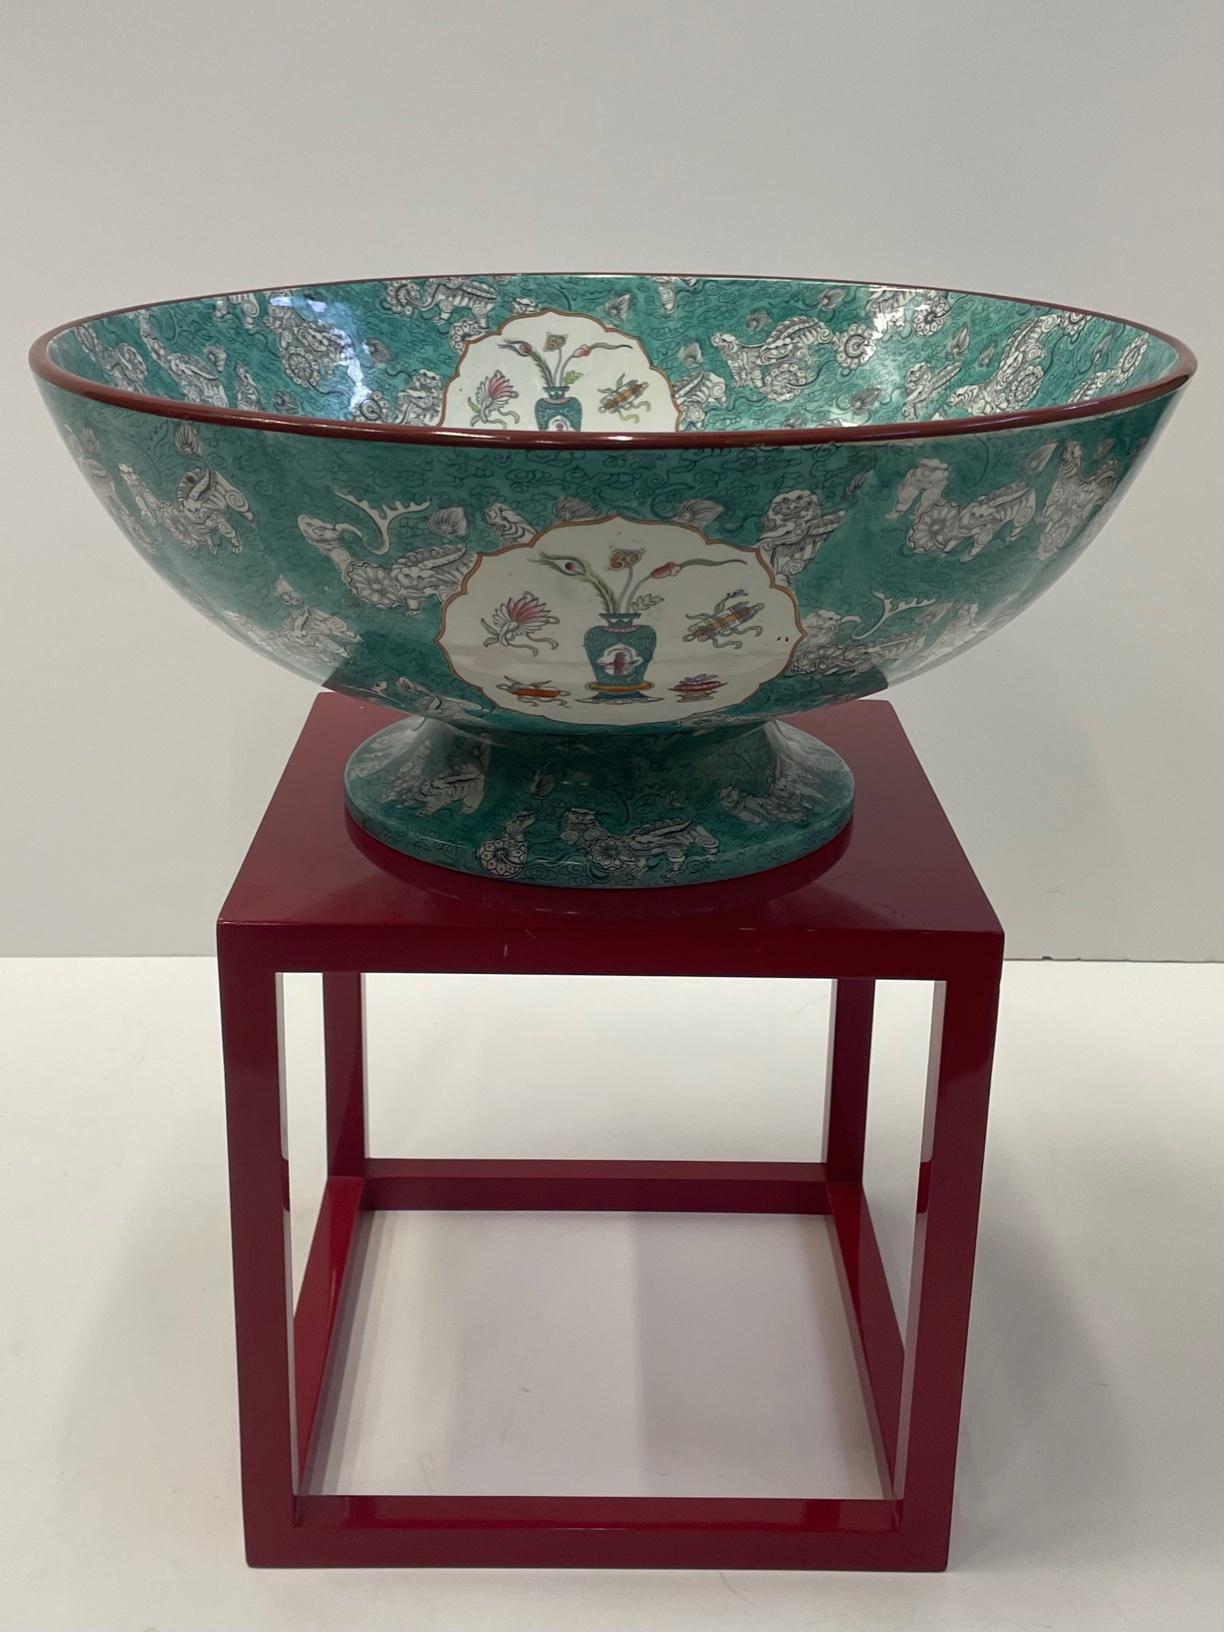 Magnificent large antique English porcelain bowl having sumptuous Asian inspired decoration with foo dogs, vases with flowers, round white medallions and a striking celadon green background. Marked on the bottom.